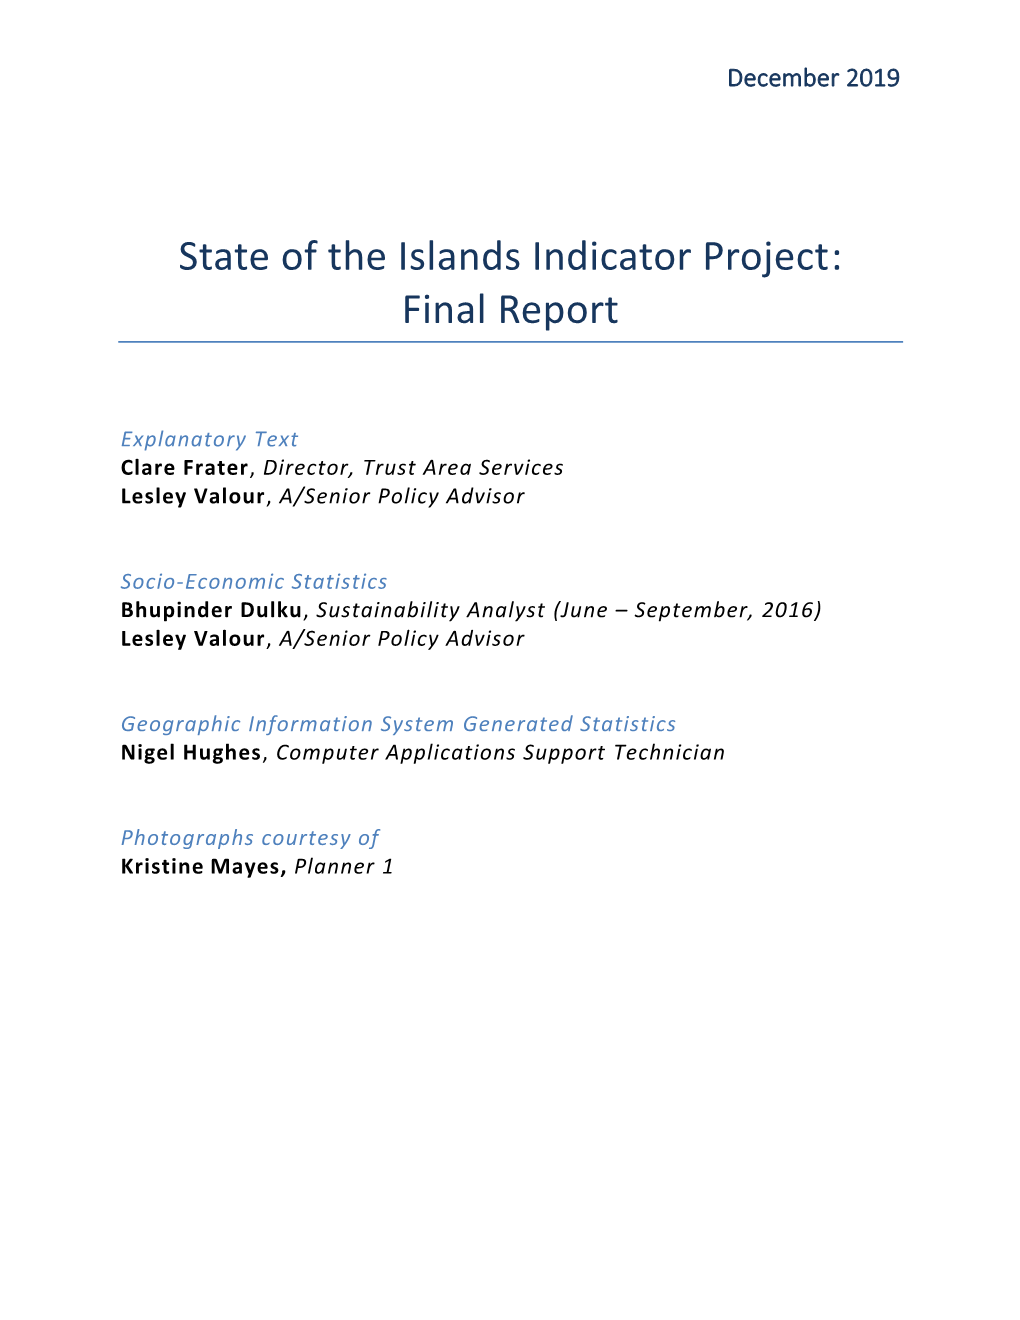 State of the Islands Indicator Project: Final Report